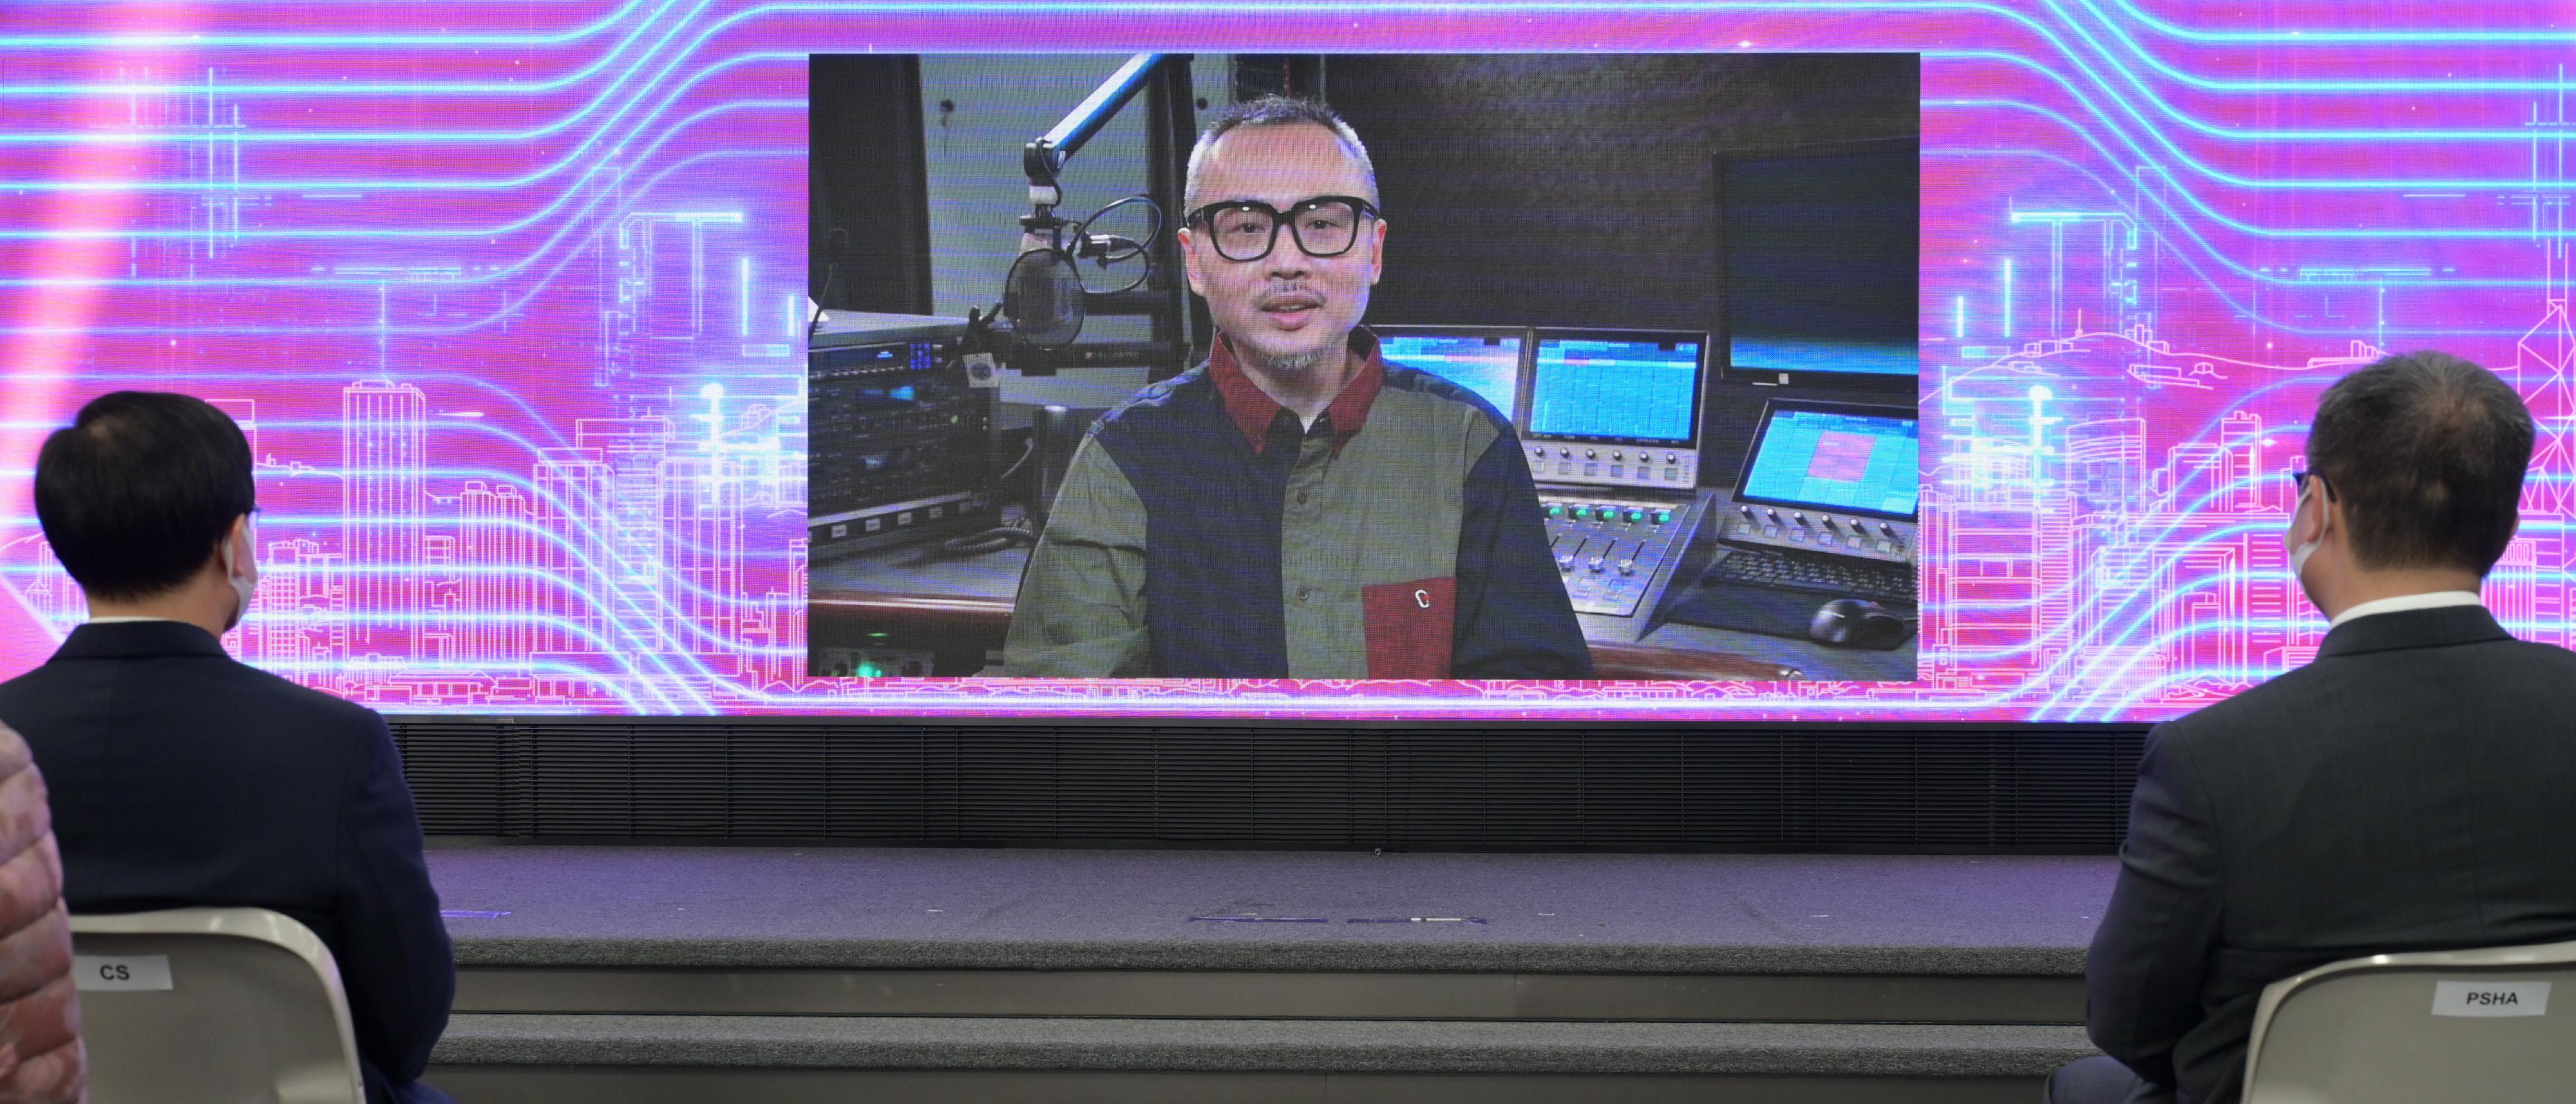 The Launch of Celebrations for the 25th Anniversary of the Establishment of the Hong Kong Special Administrative Region of the People’s Republic of China was held today (December 29). The melody of the 25th anniversary theme song was premiered at the ceremony. Musician Keith Chan, who takes charge of planning the song, shared his creative ideas through a video.